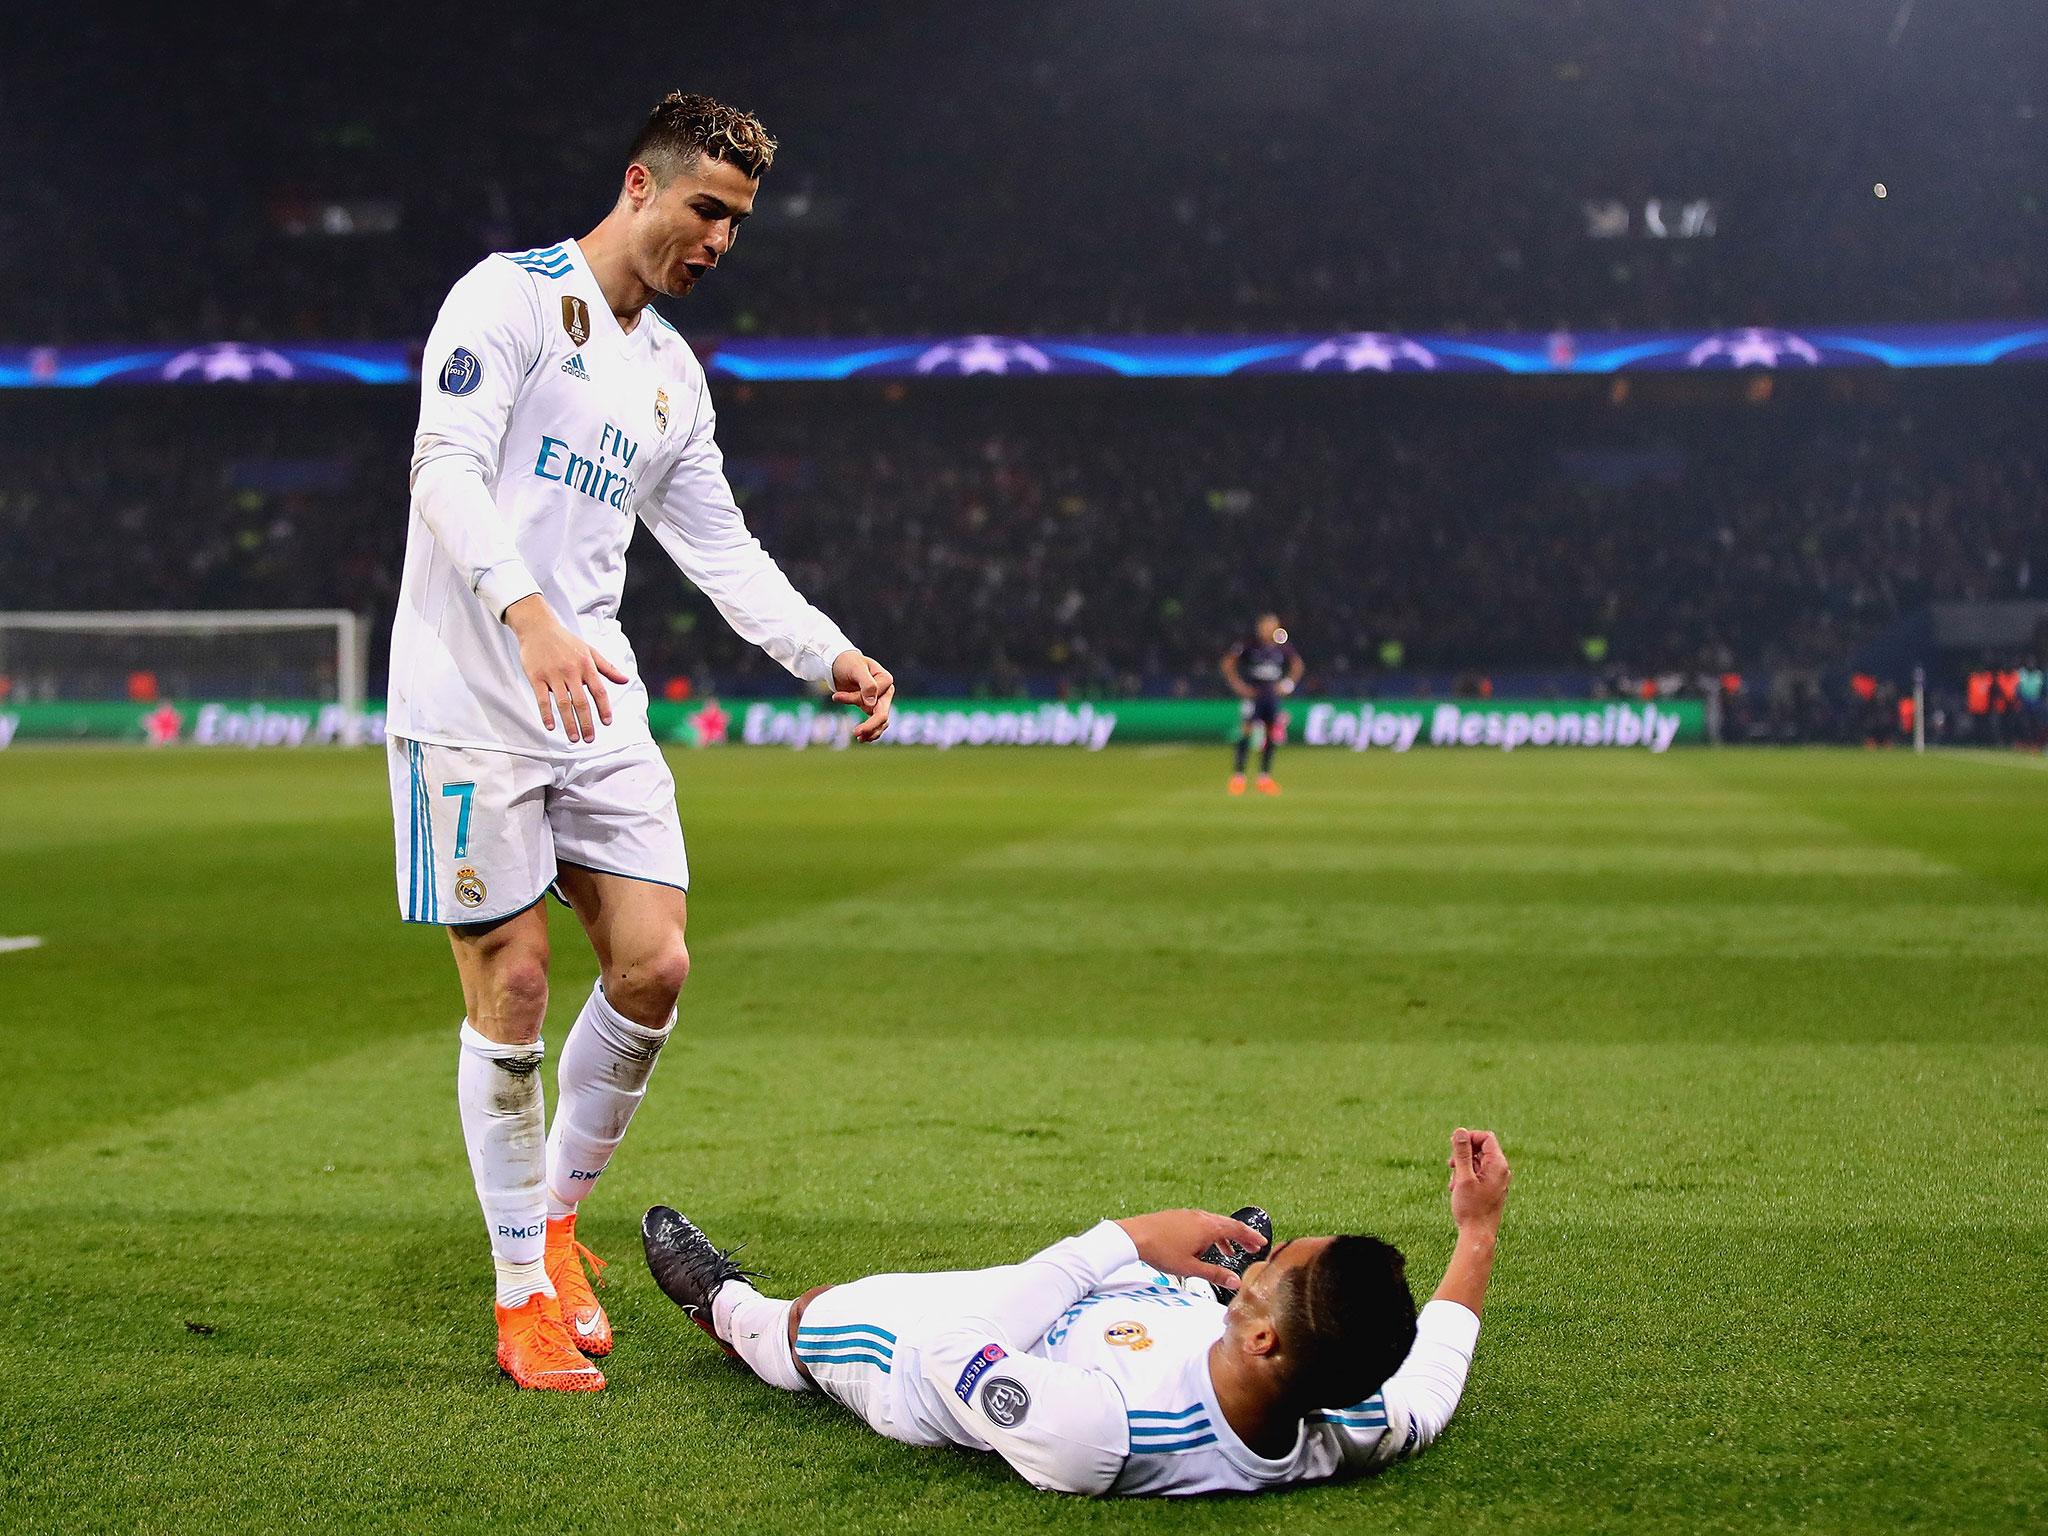 Real Madrid's big-game experience proved to be too much for PSG